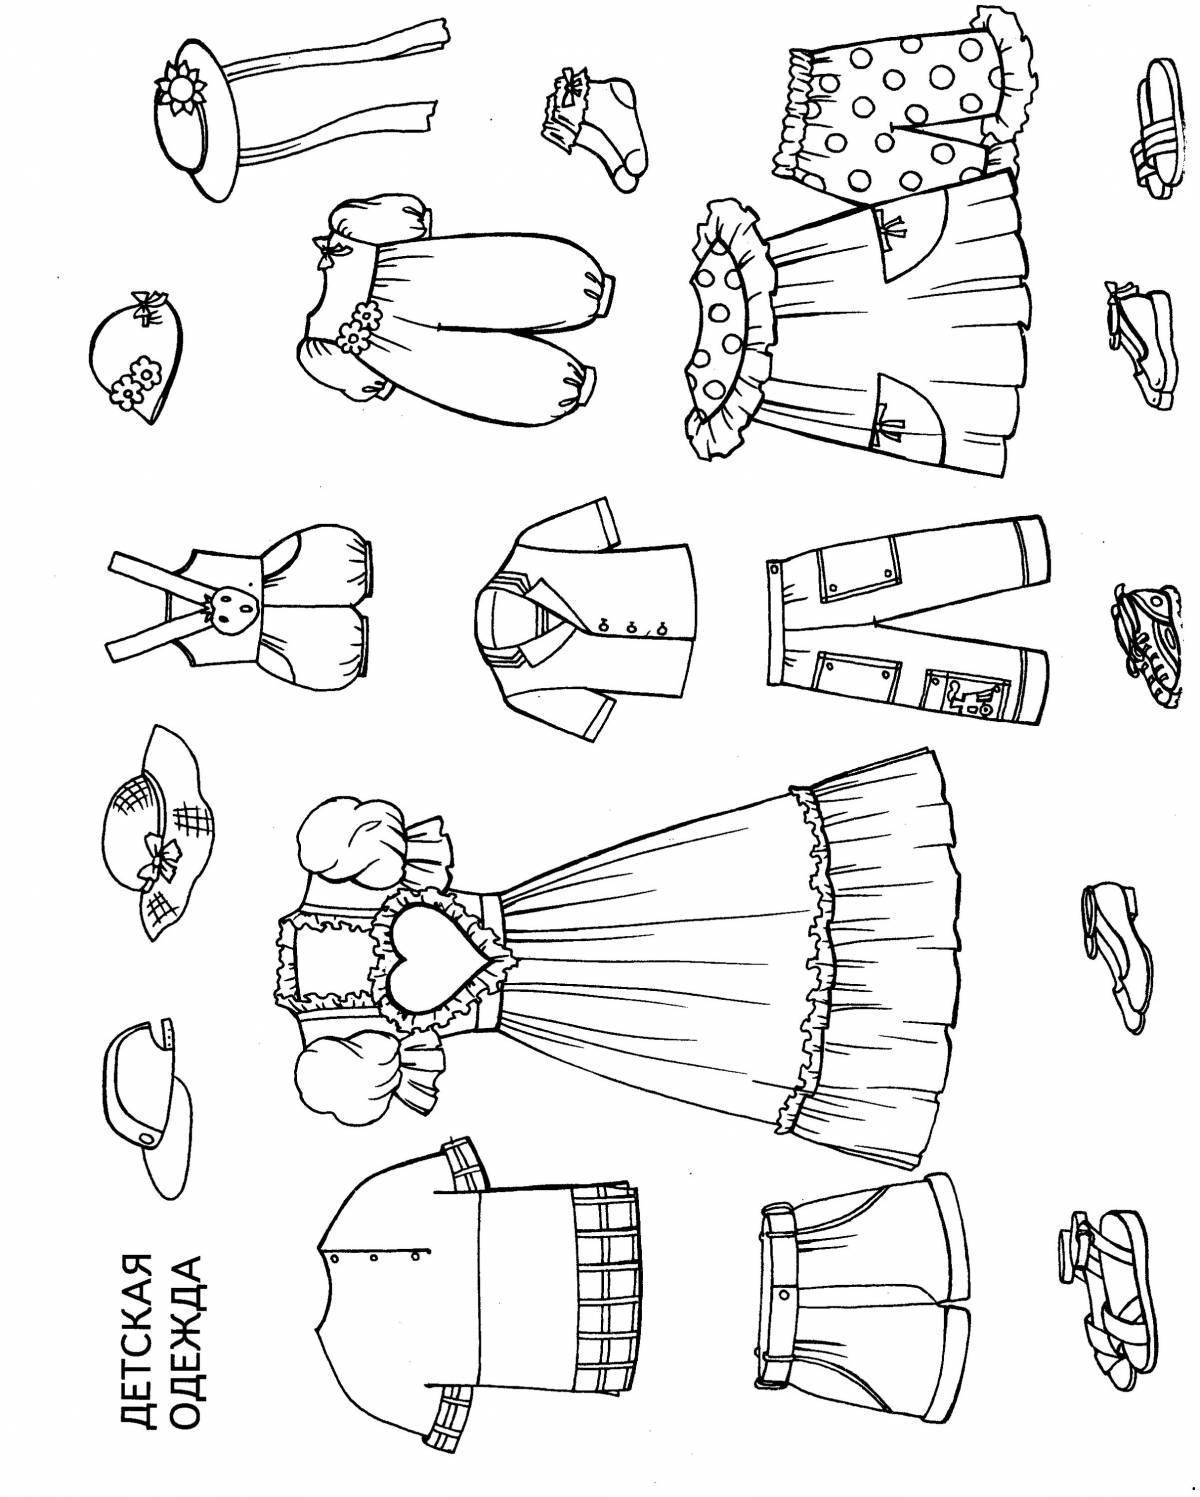 Attractive uti clothing coloring page